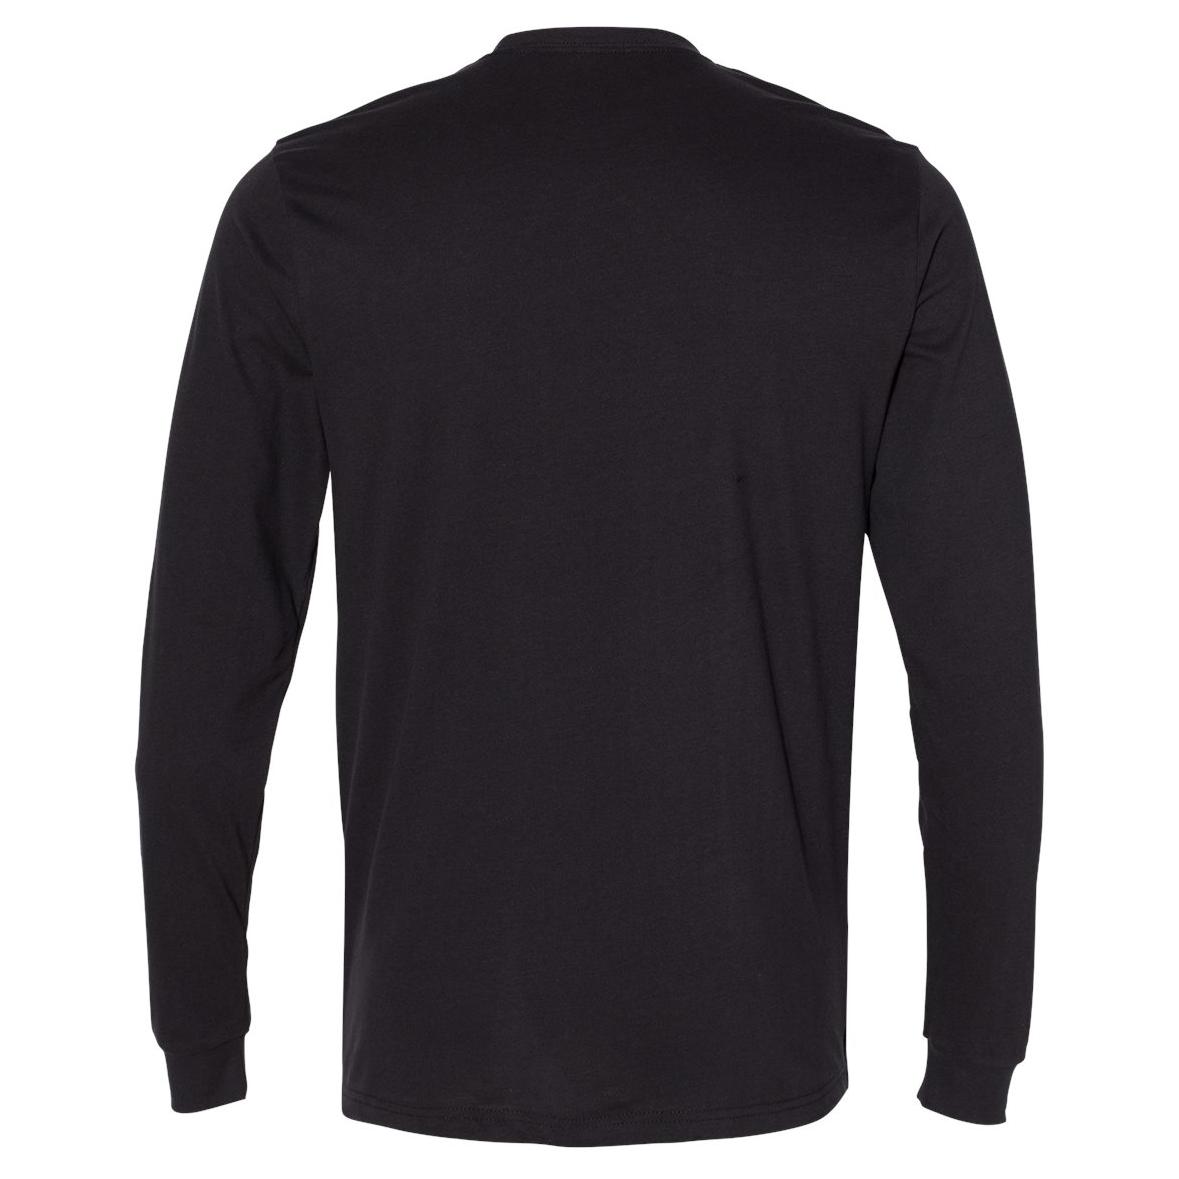 Next Level 6411 Sueded Long Sleeve Crew - Black | Full Source